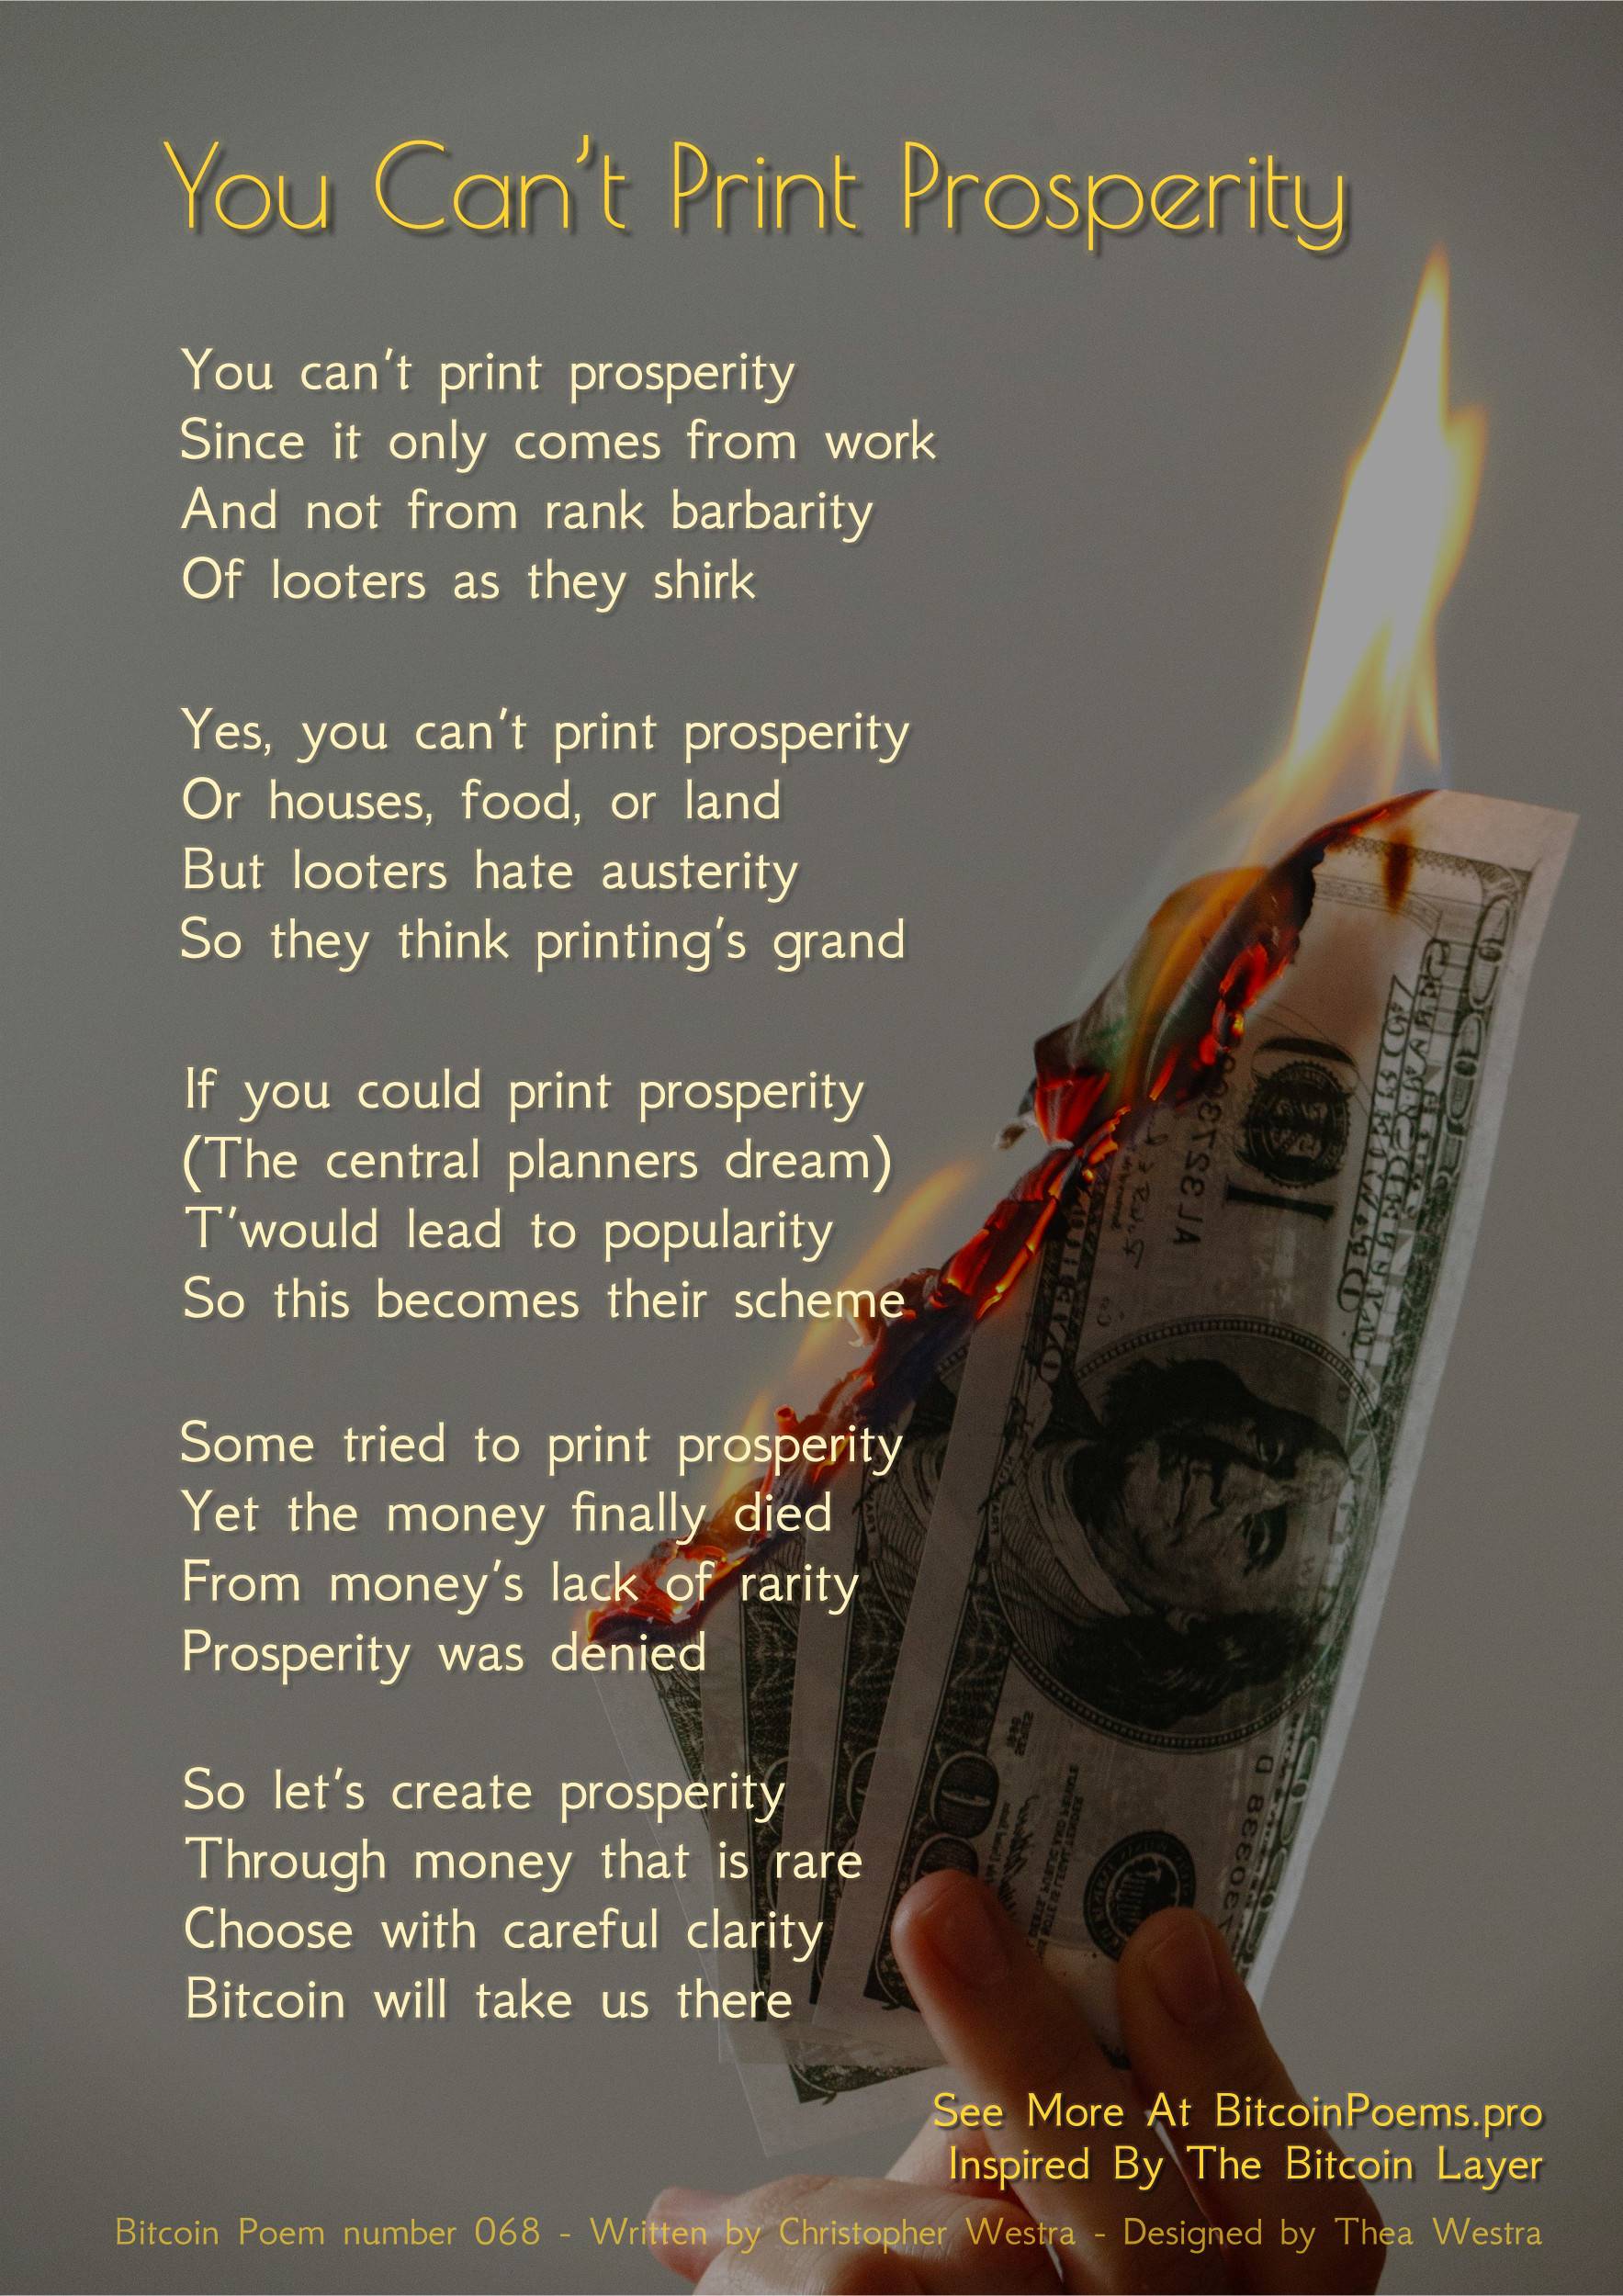 You Can't Print Prosperity - Bitcoin Poem 068 by Christopher Westra